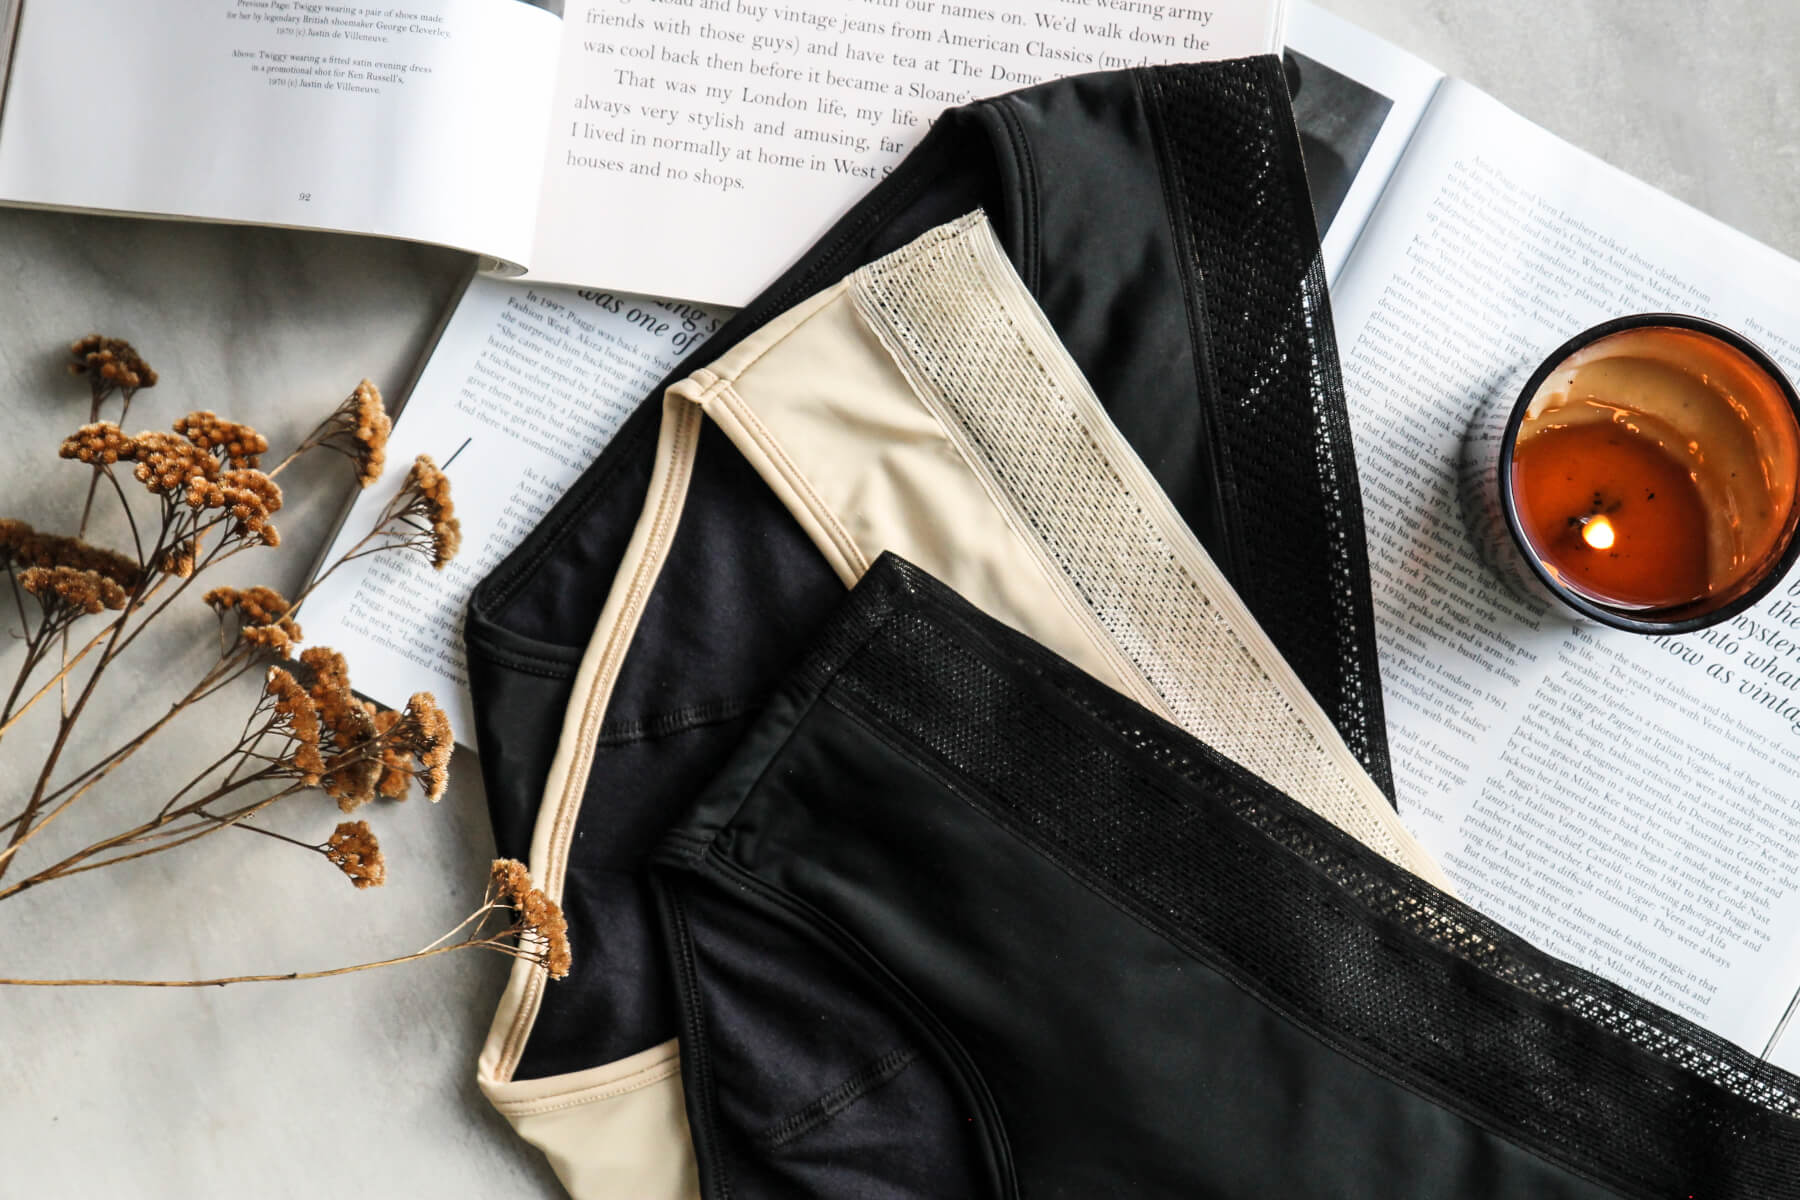 On the go and expecting flow? We've got you covered. Thinx